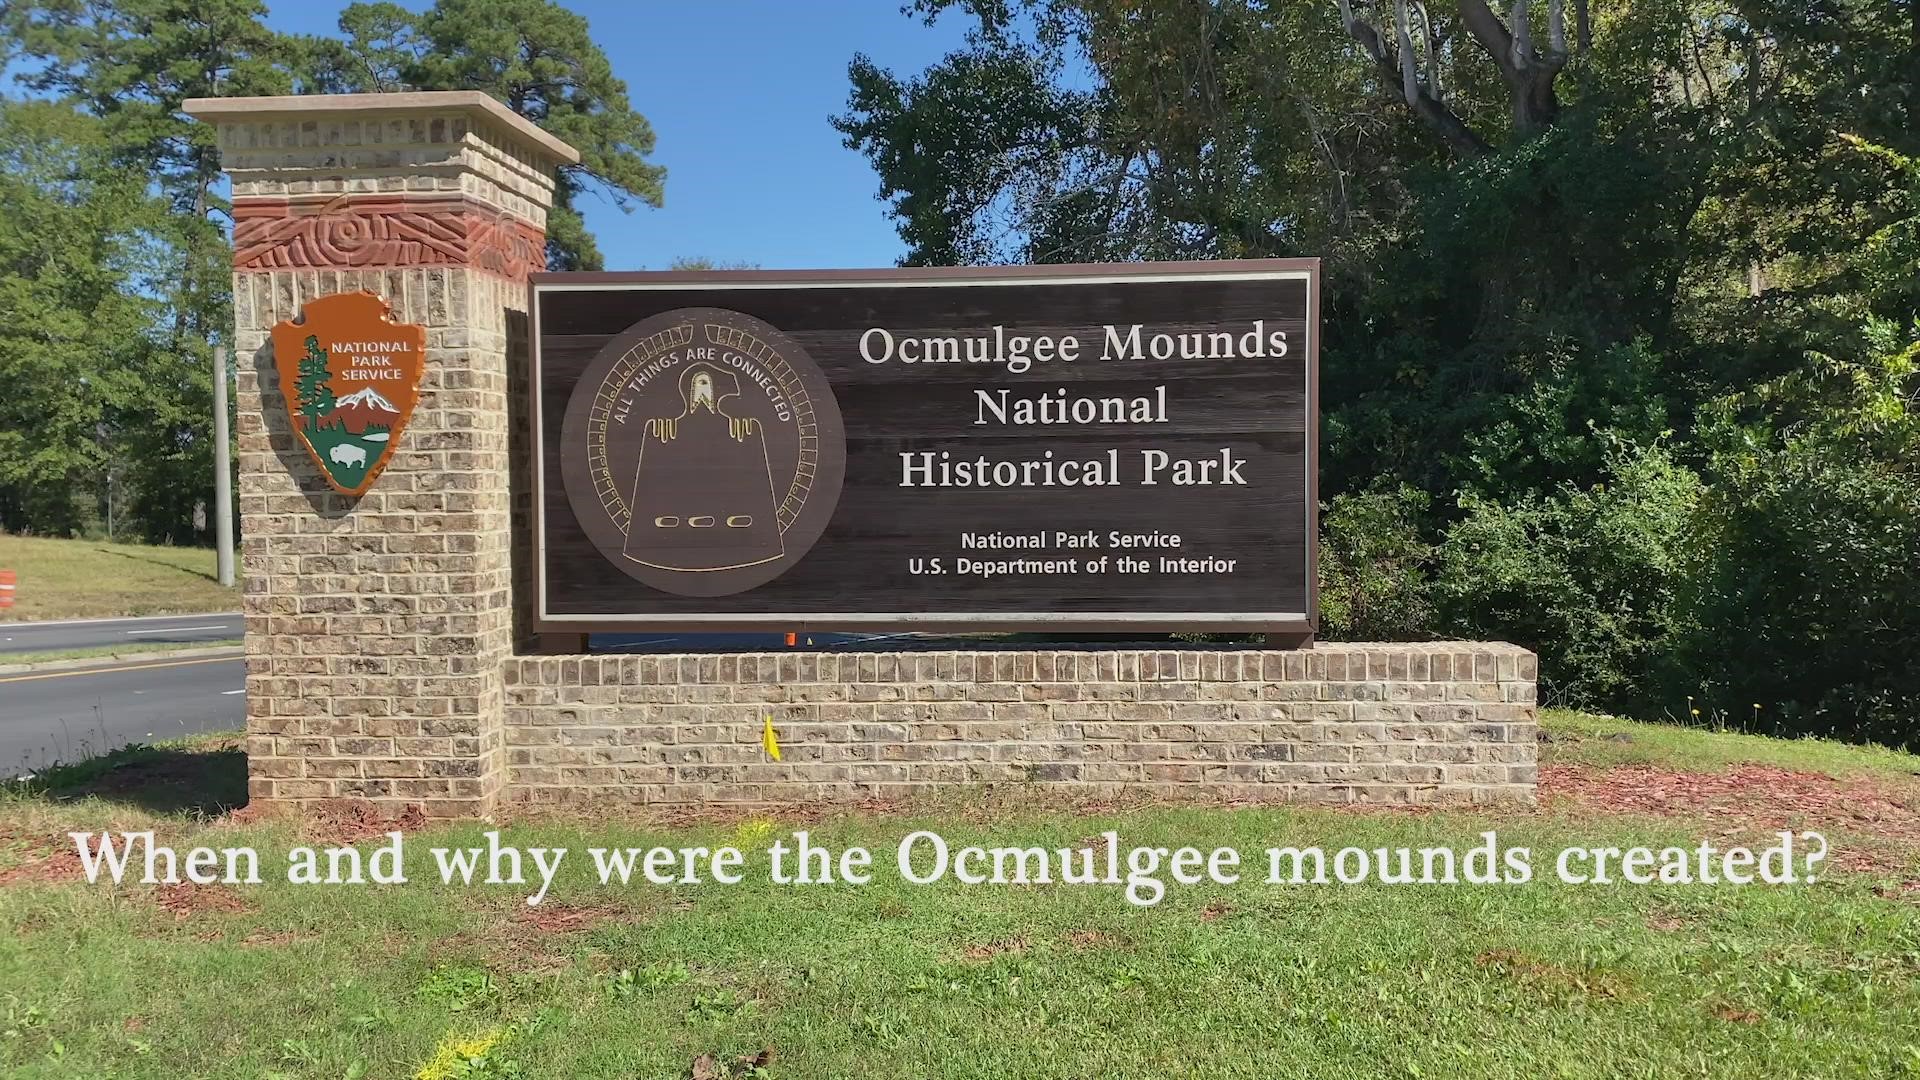 The Ocmulgee Mounds National Historical Park may have not been established until 1936, but its history dates as far back as before 1000 CE.